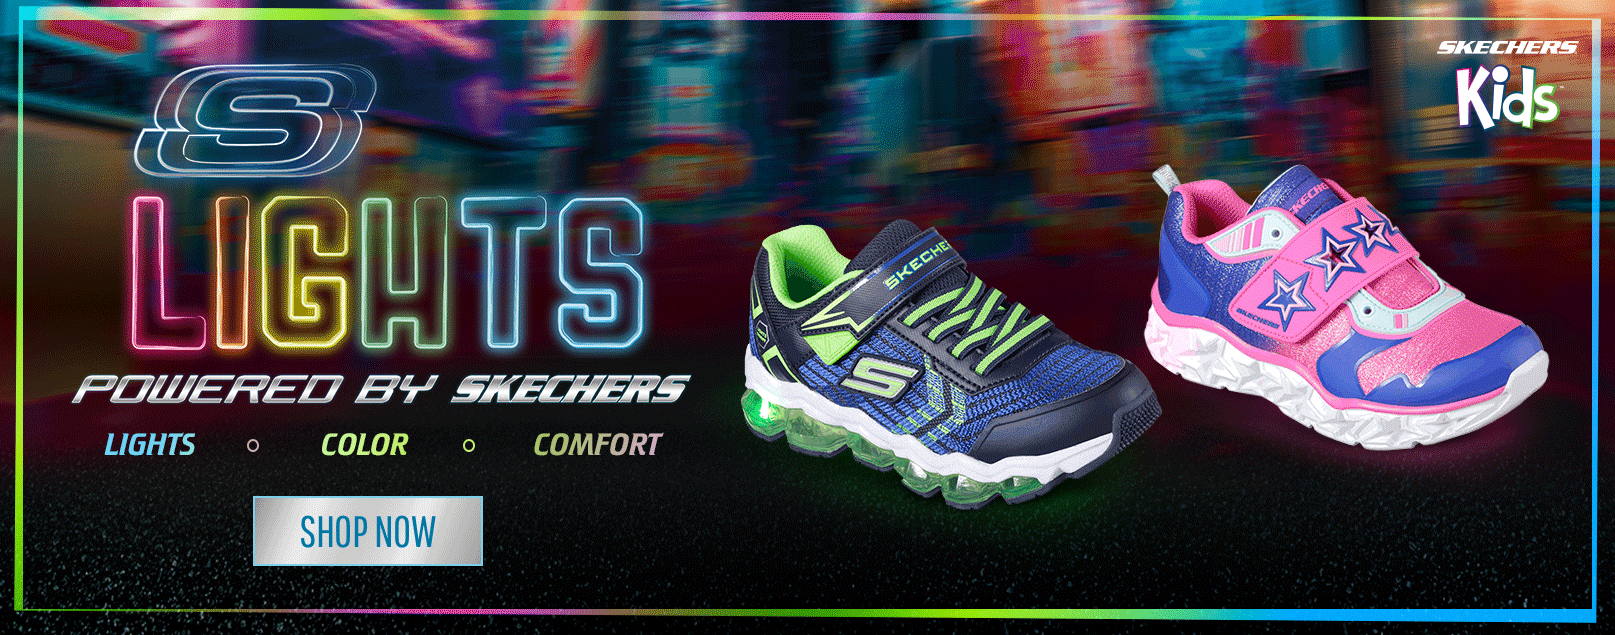 skechers s lights and twinkle toes light up shoes with fun colorful